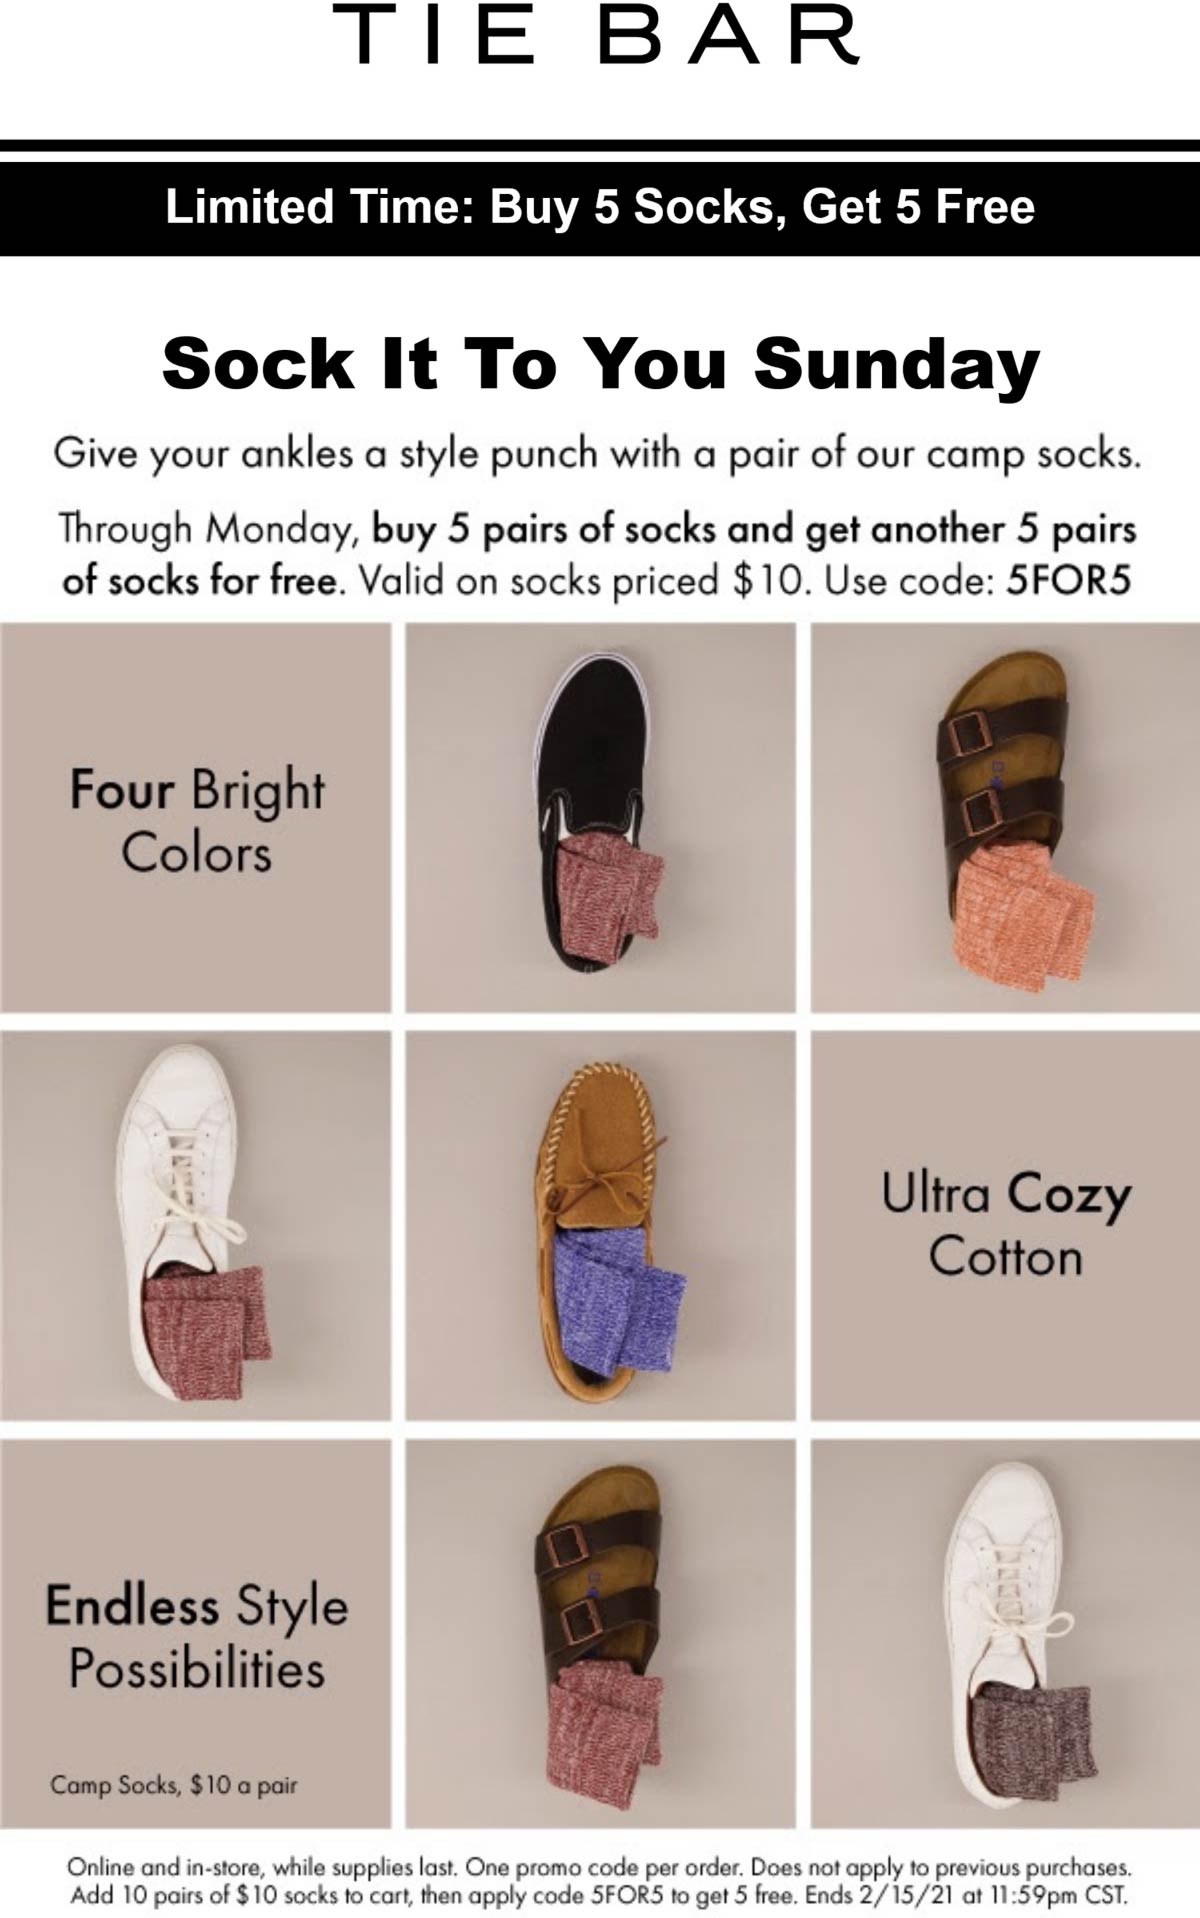 Tie Bar restaurants Coupon  Second 5 pair free on socks today at Tie Bar via promo code 5FOR5 #tiebar 